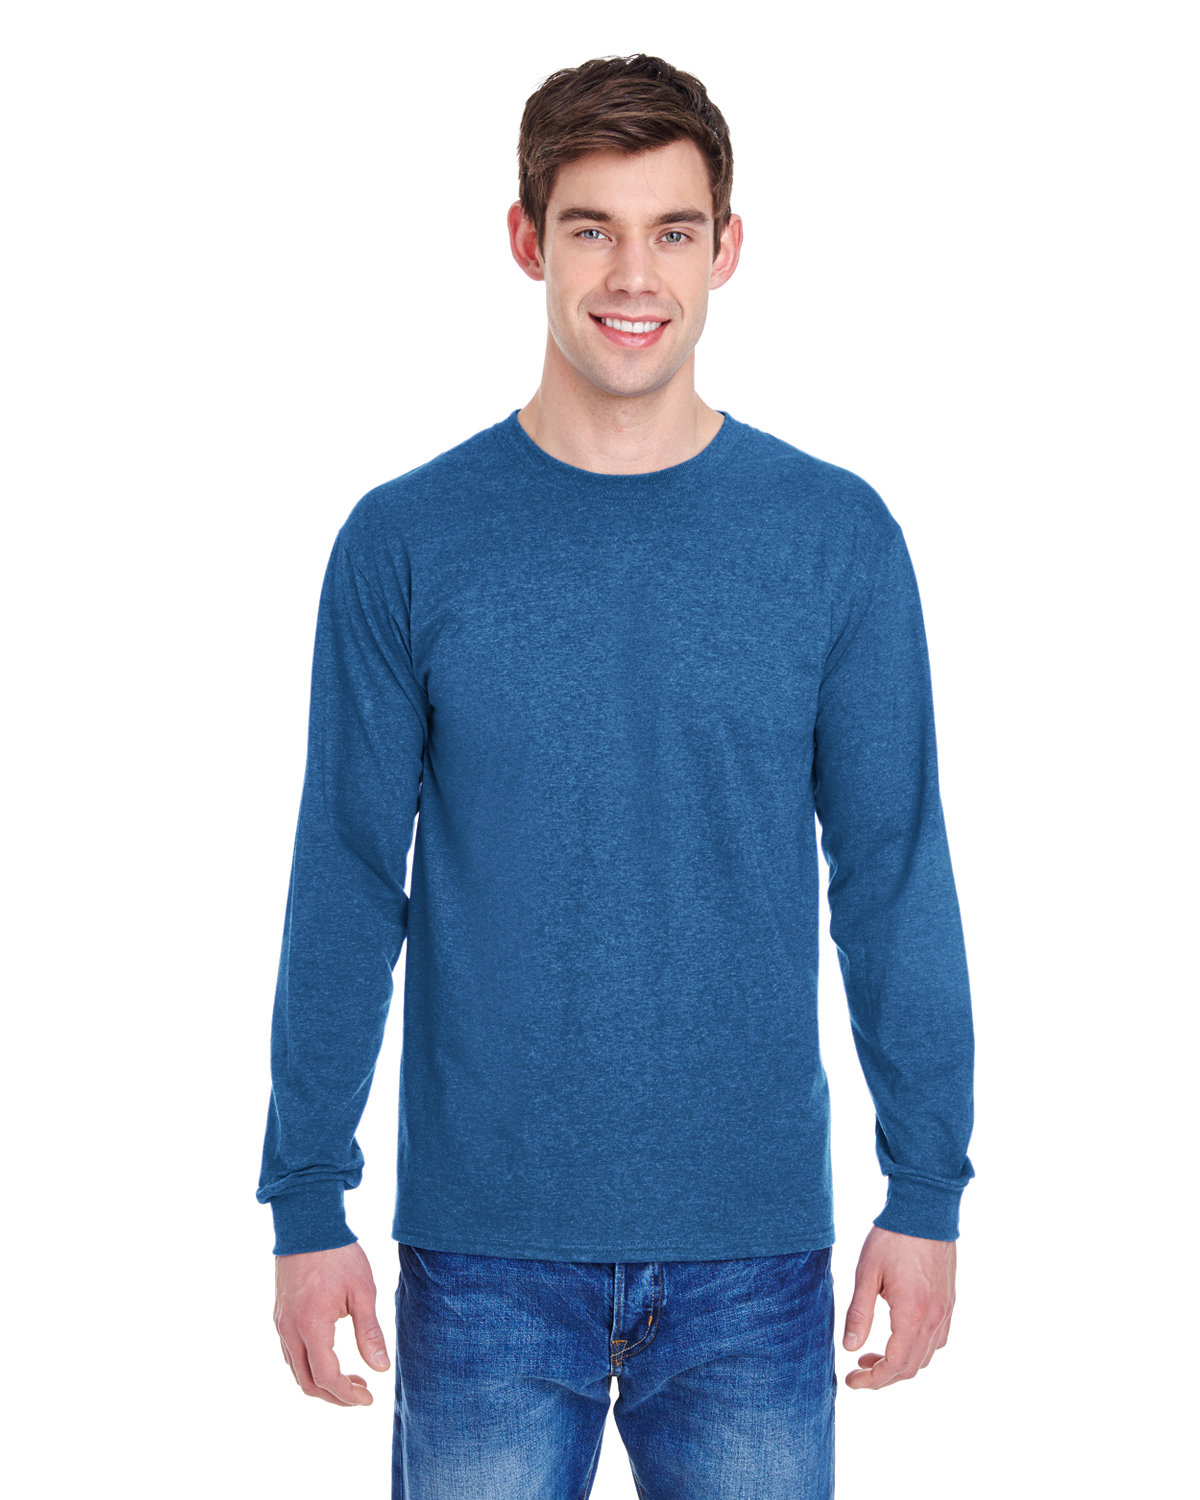 Fruit of the Loom 4930, HD Cotton ™ 100% Cotton Long Sleeve T-Shirt